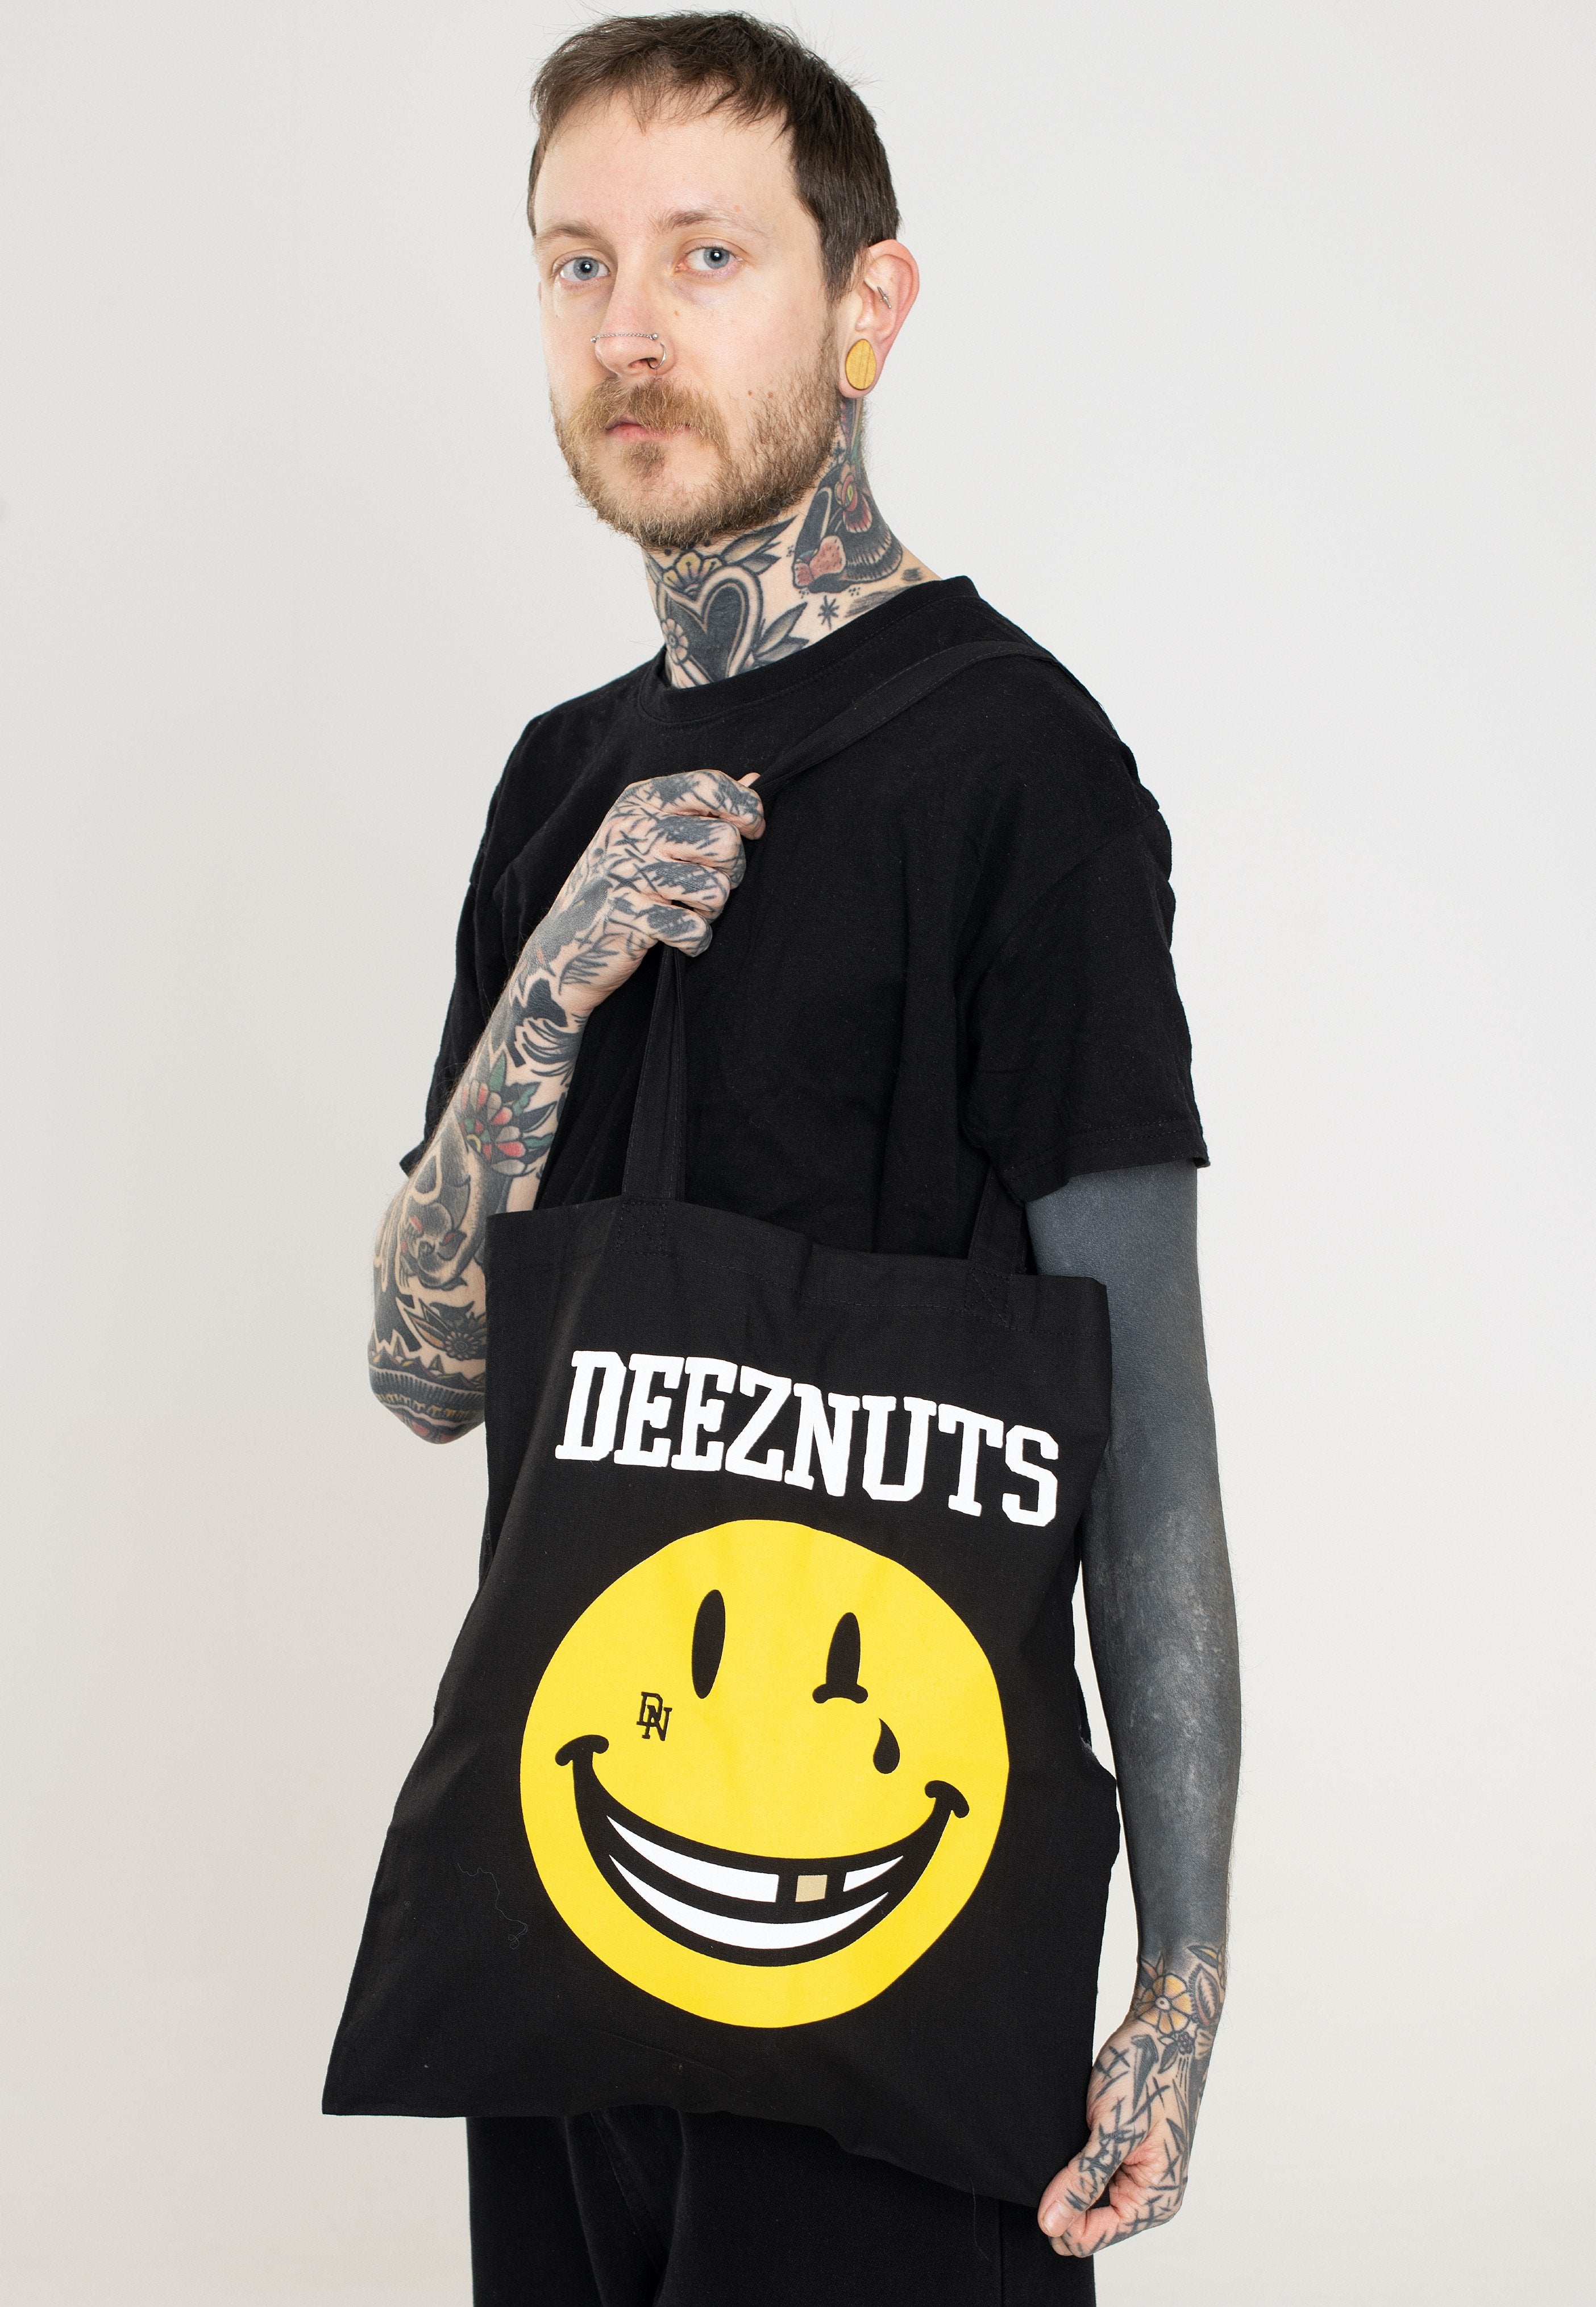 Deez Nuts - You Got Me Fucked Up - Tote Bag